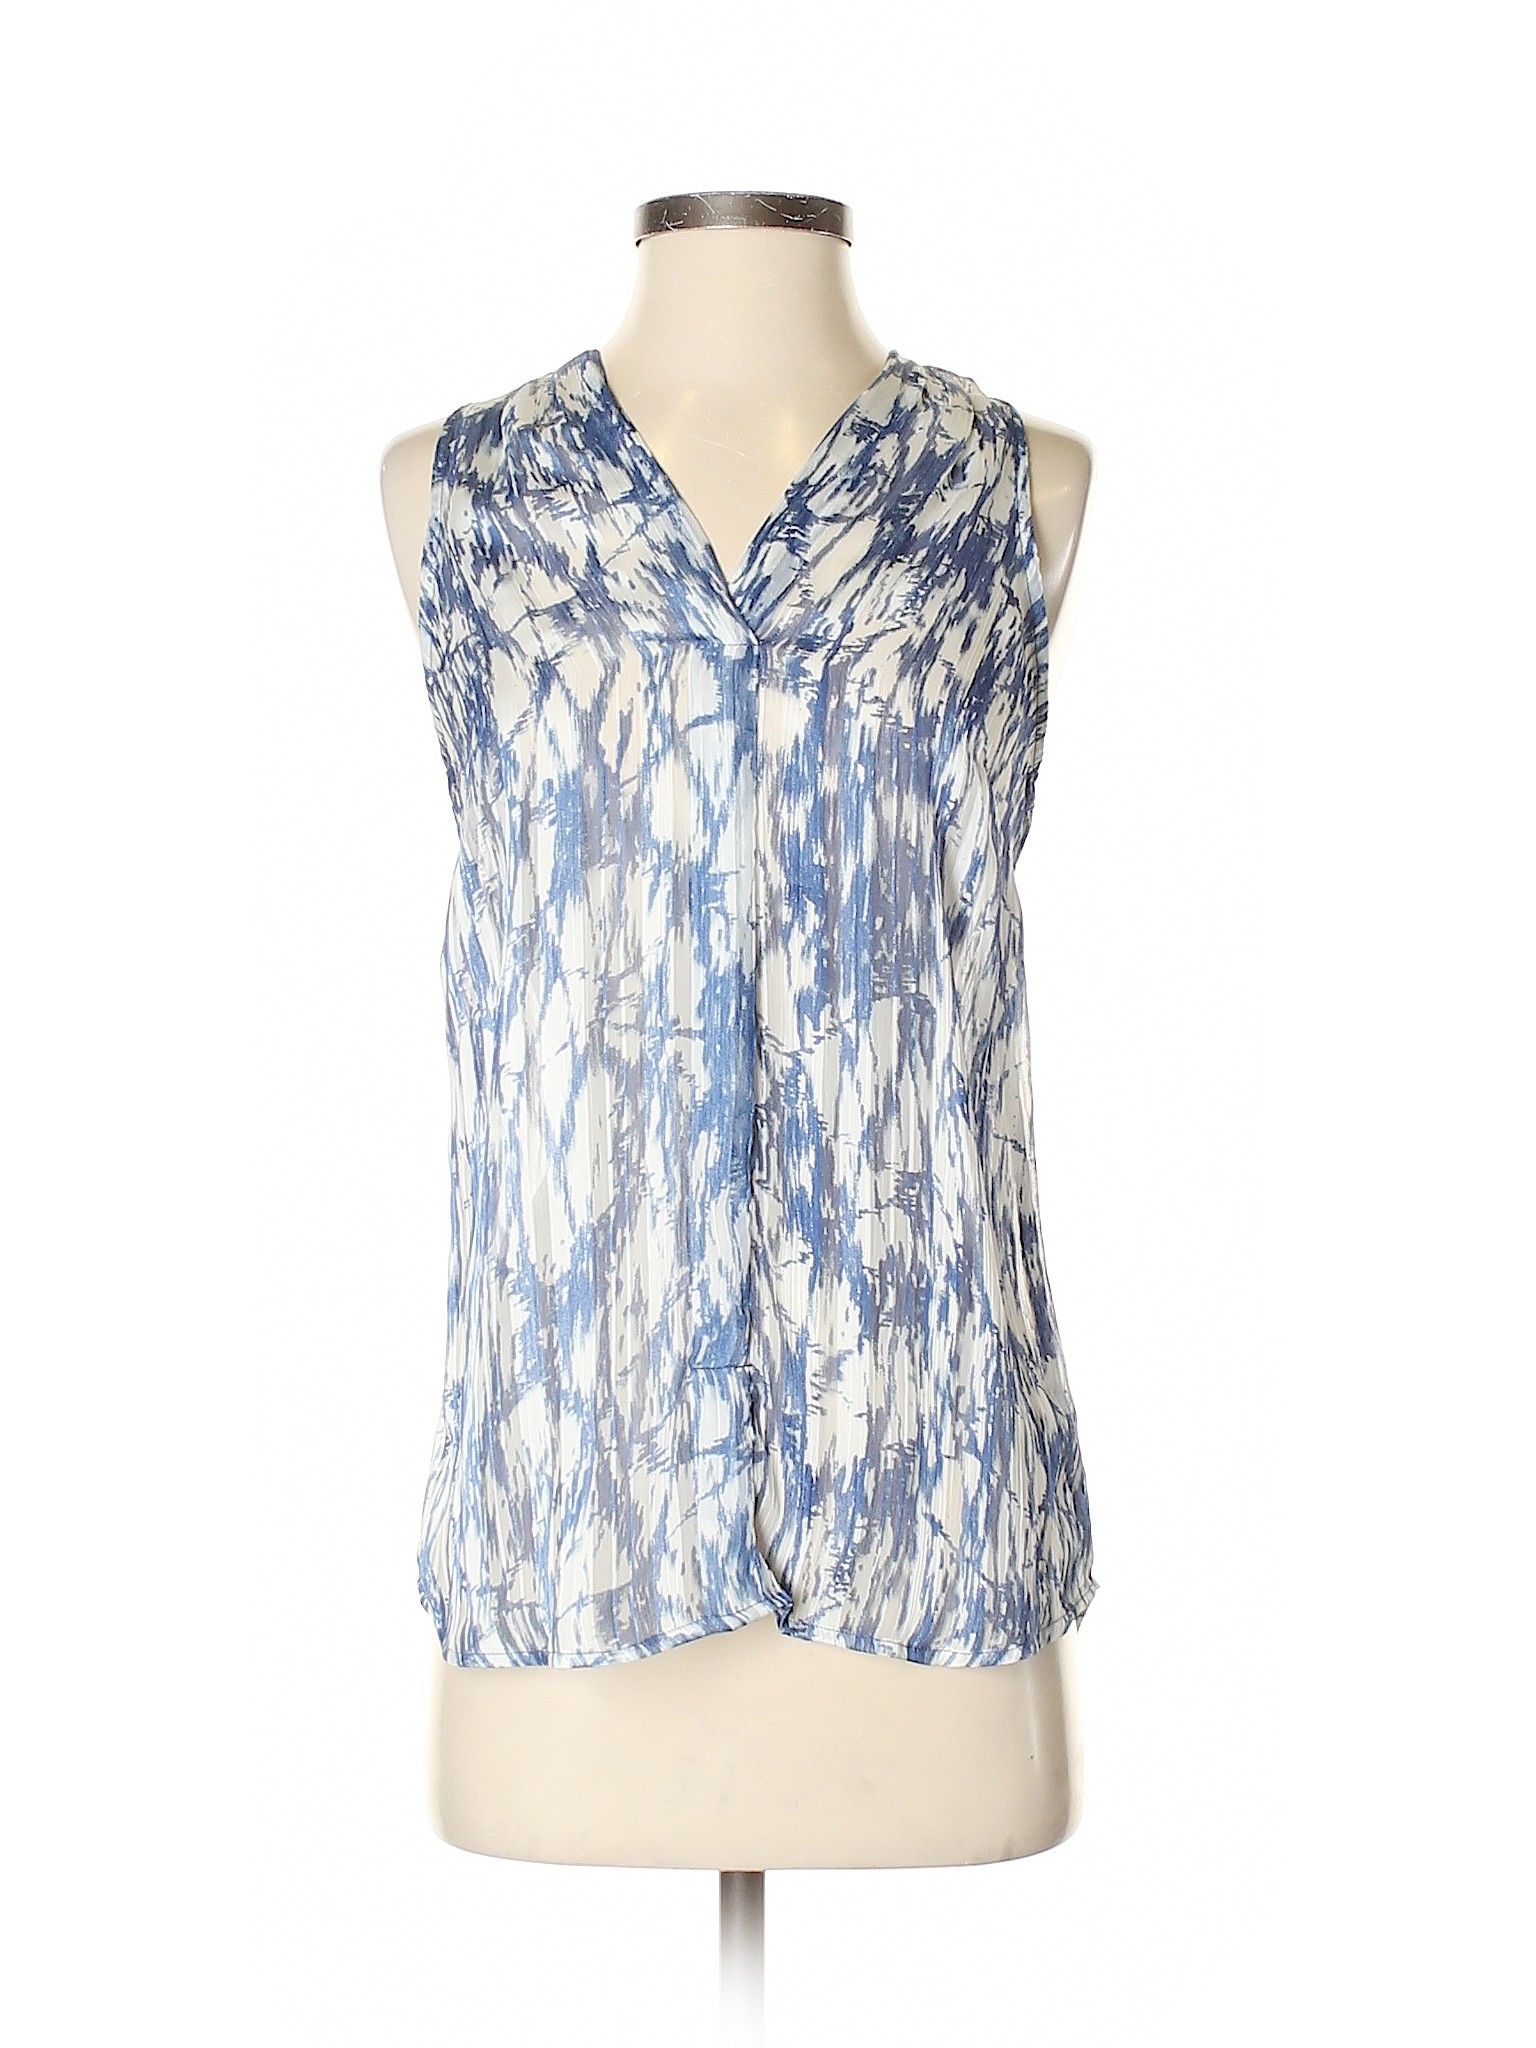 cynthia rowley for marshalls Women's Tops On Sale Up To 90% Off Retail ...